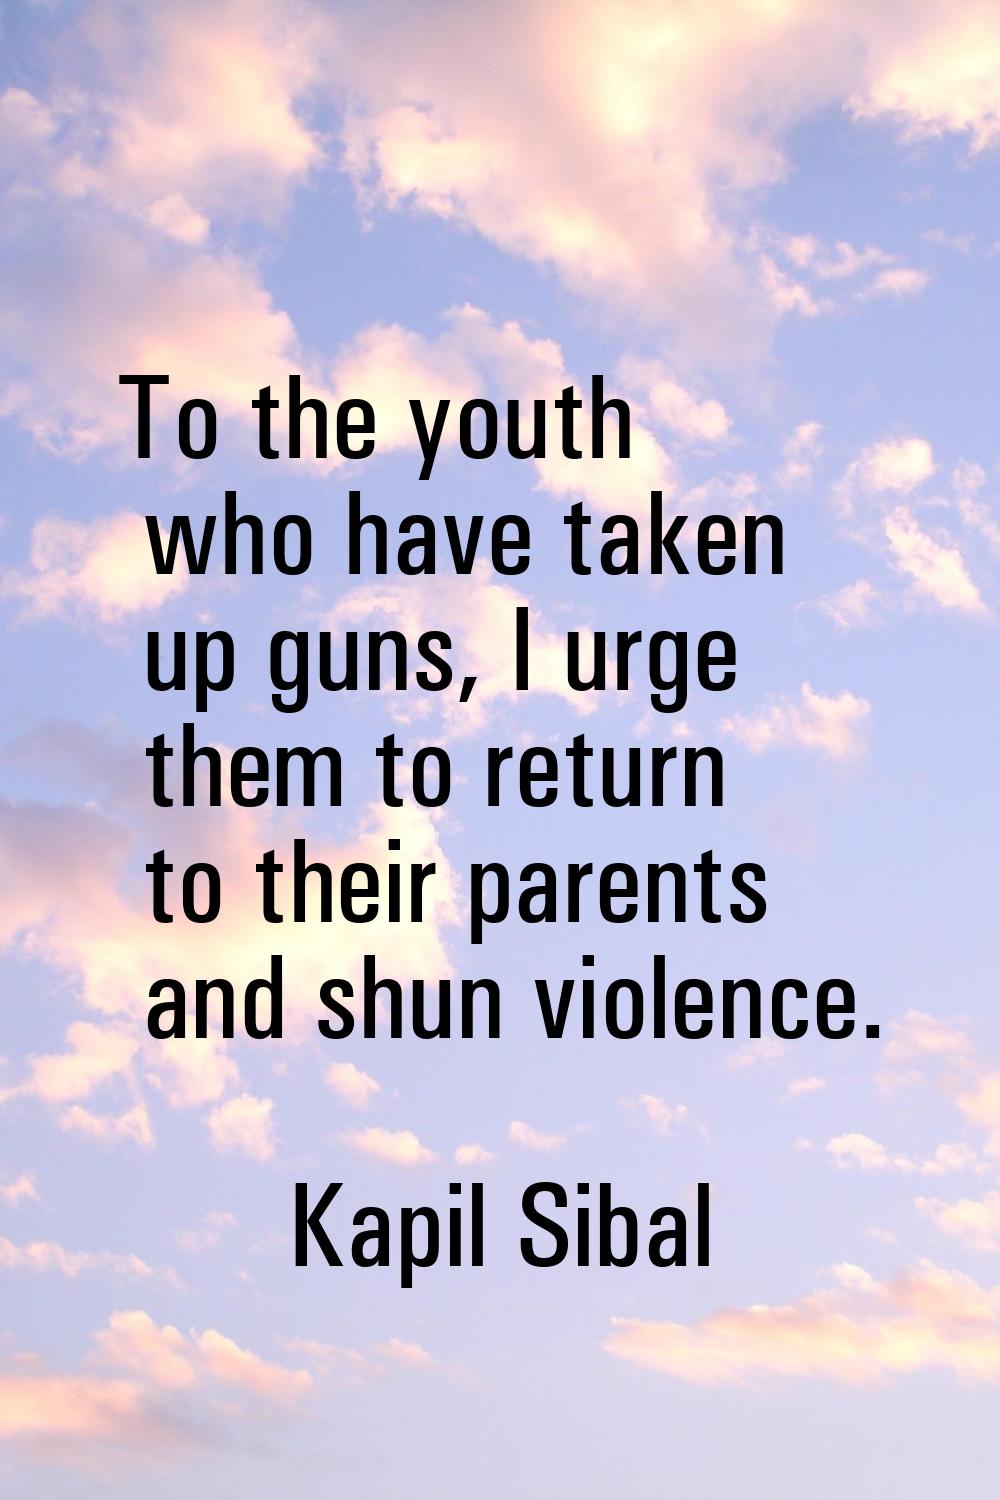 To the youth who have taken up guns, I urge them to return to their parents and shun violence.